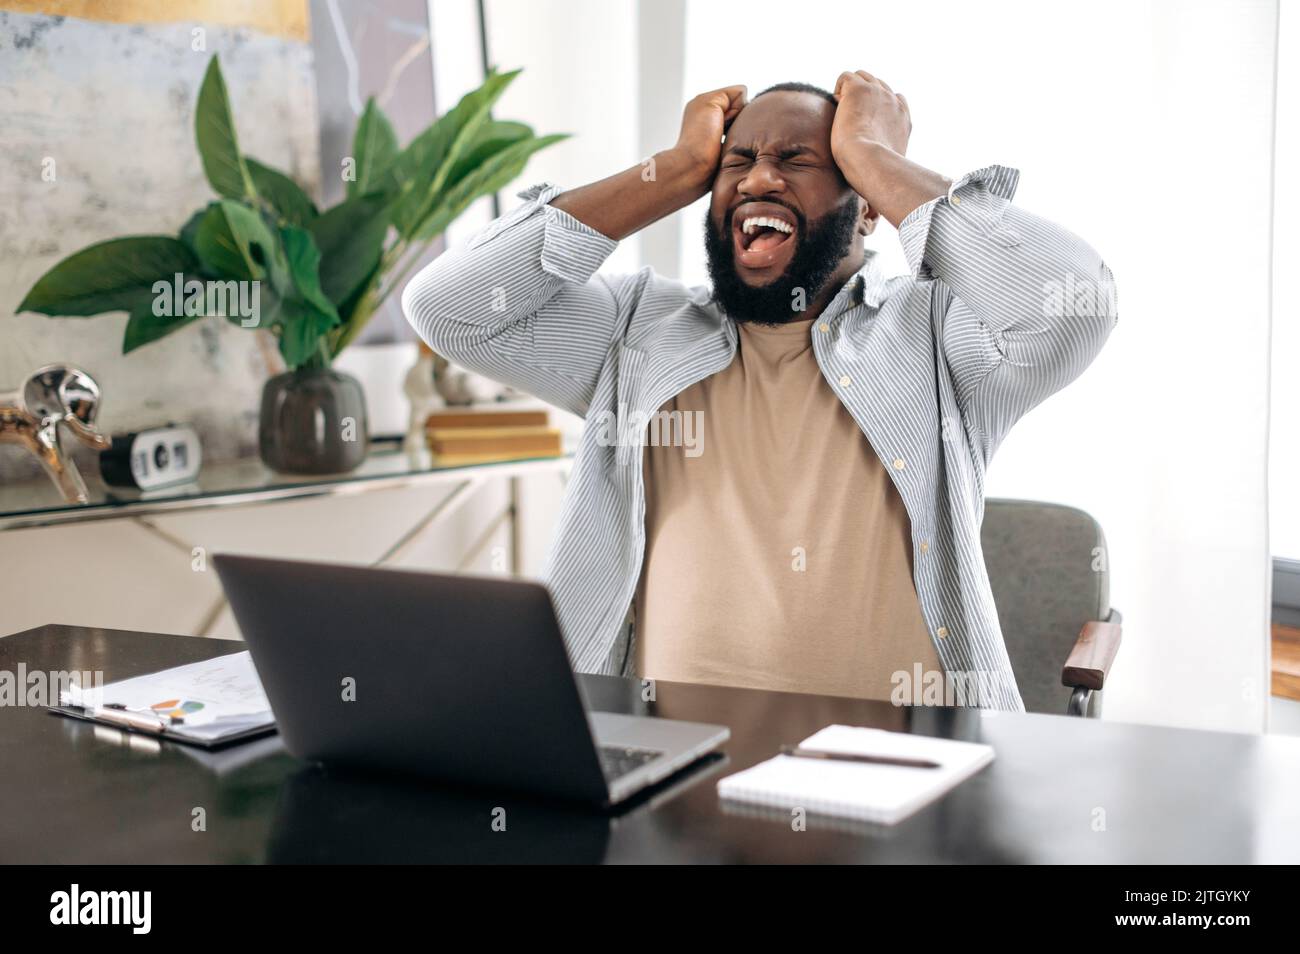 Annoyed african american young man, company worker, freelancer, ceo company, sitting at a desk in modern office, yelling, screaming, dissatisfied with the result, irritated emotional state Stock Photo